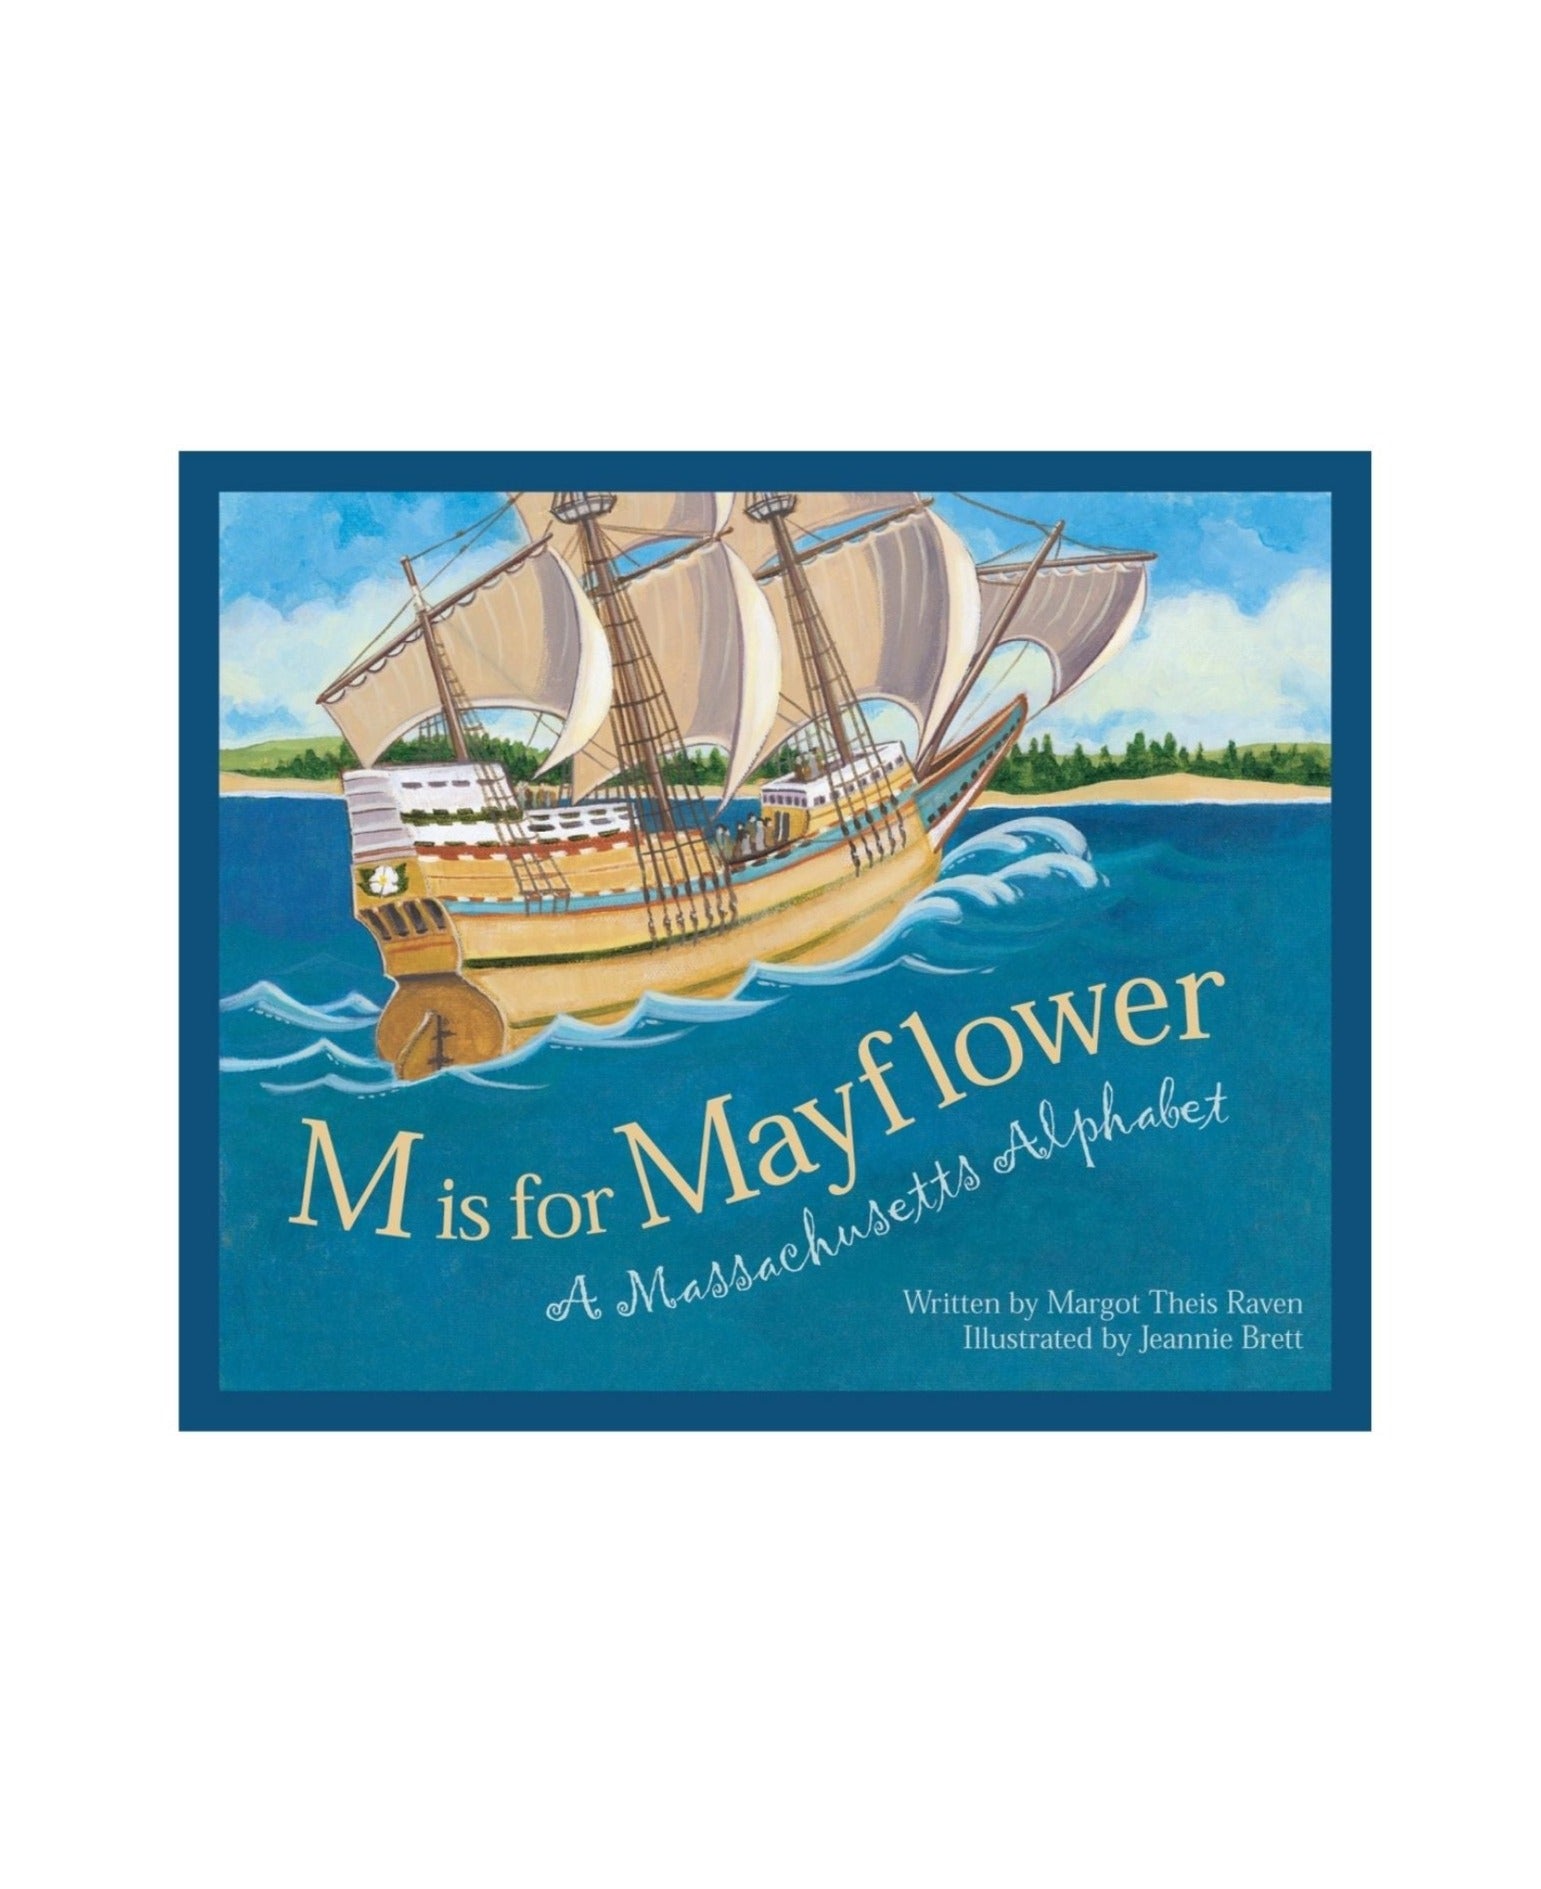 M is for Mayflower book cover